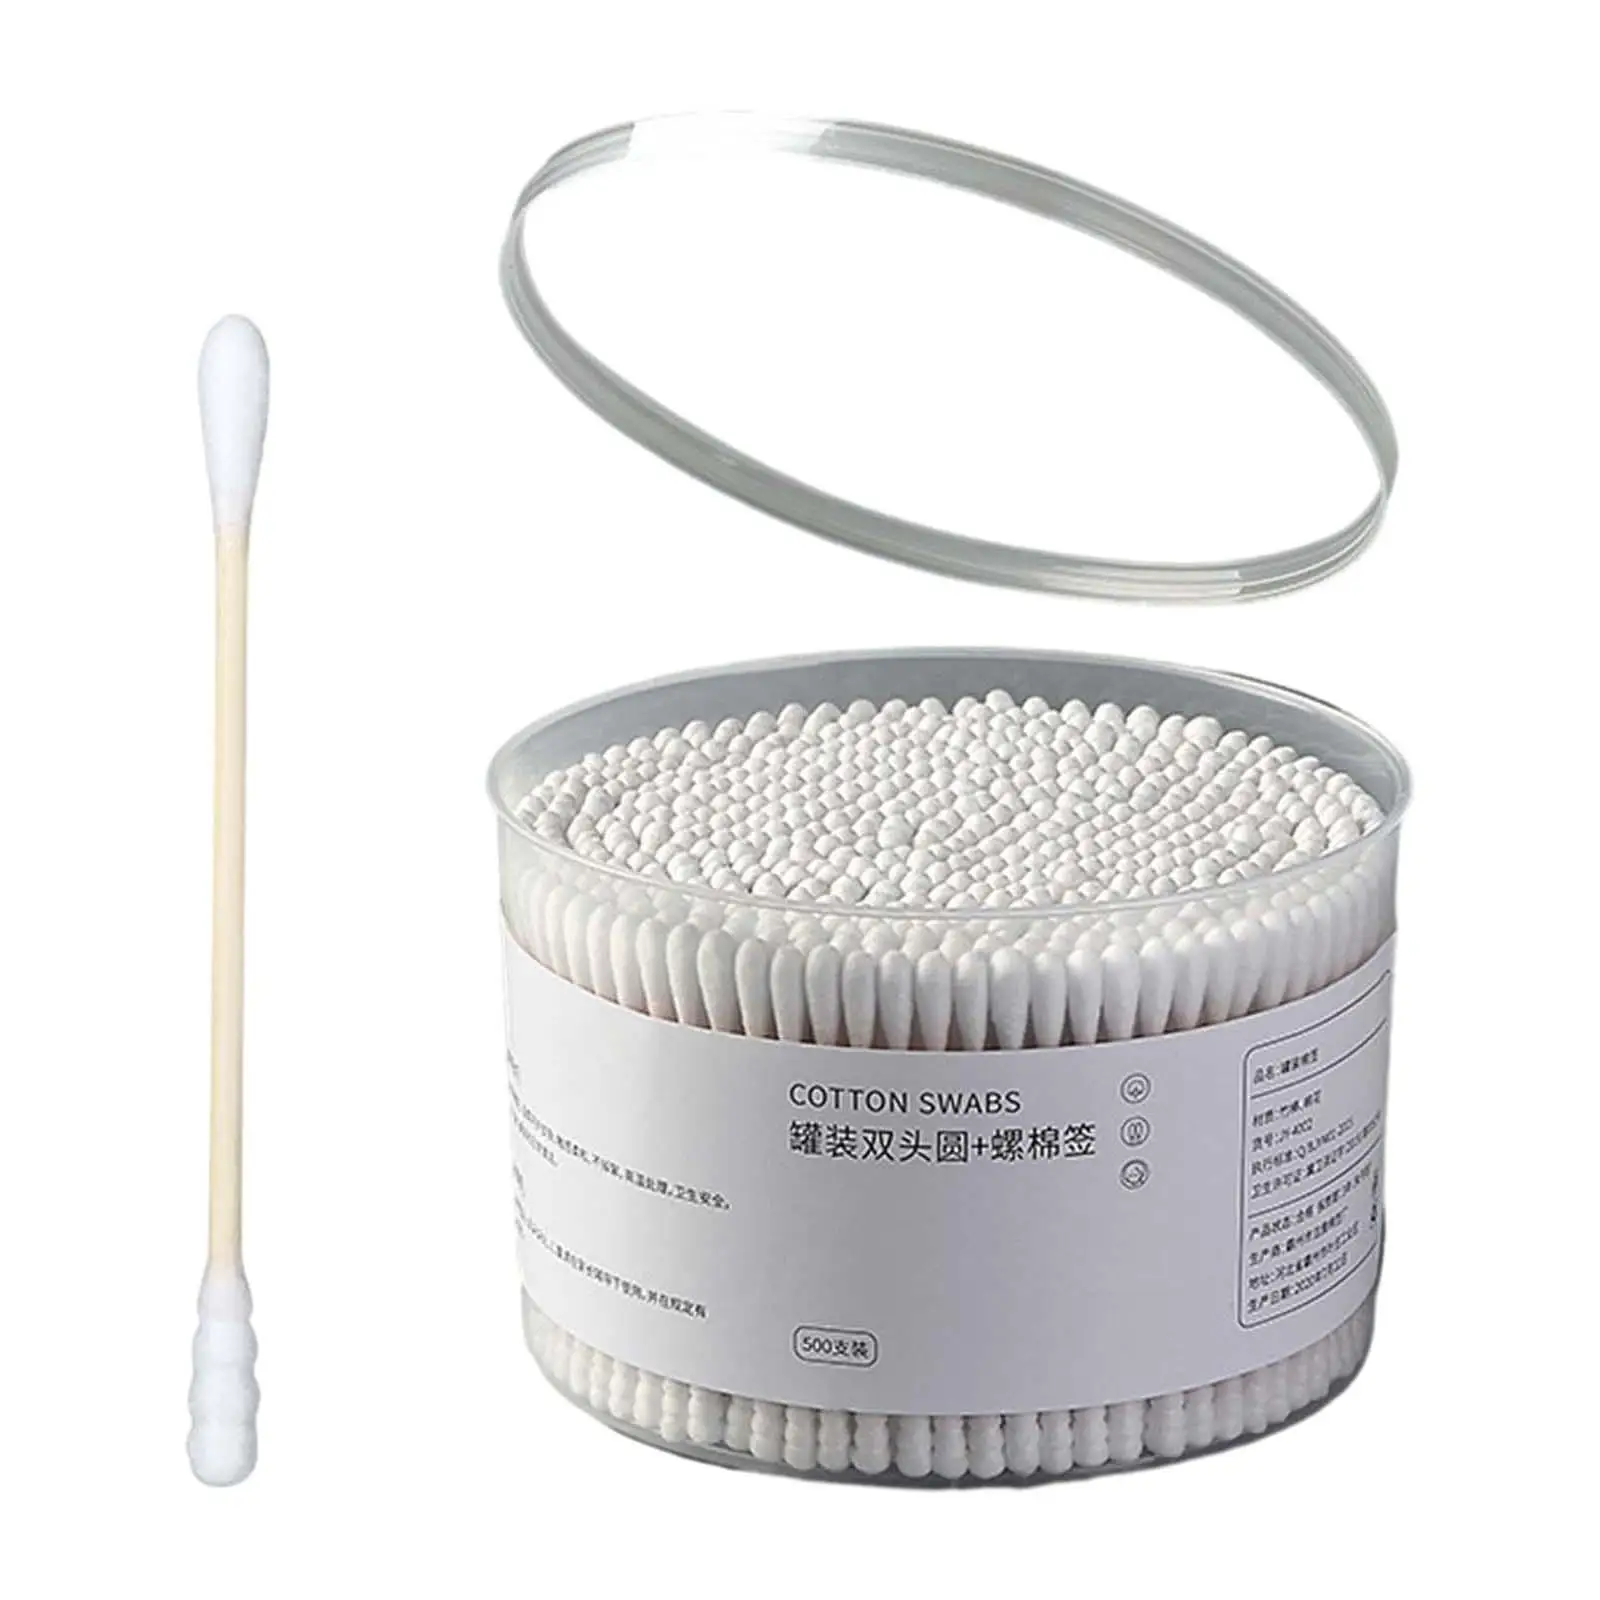 500x Double Ended Cotton Swabs Comfort for Pet Care Cleaning Beauty Applying